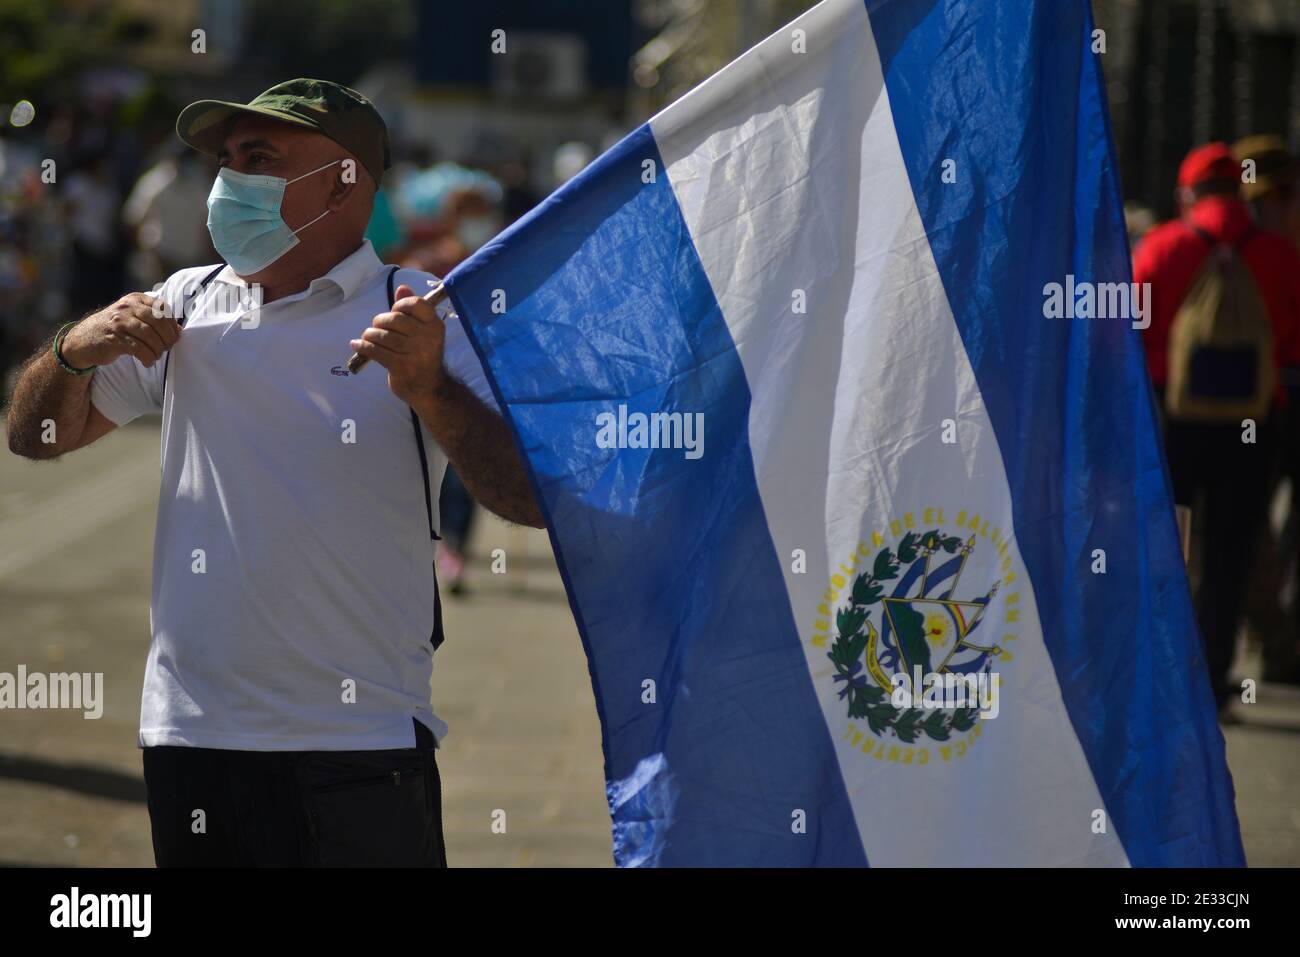 San Salvador, El Salvador. 16th Jan, 2021. War veterans gather in a rally to commemorate the 29th anniversary of the Chapultepec treaty signed to end a 12 year civil war that took